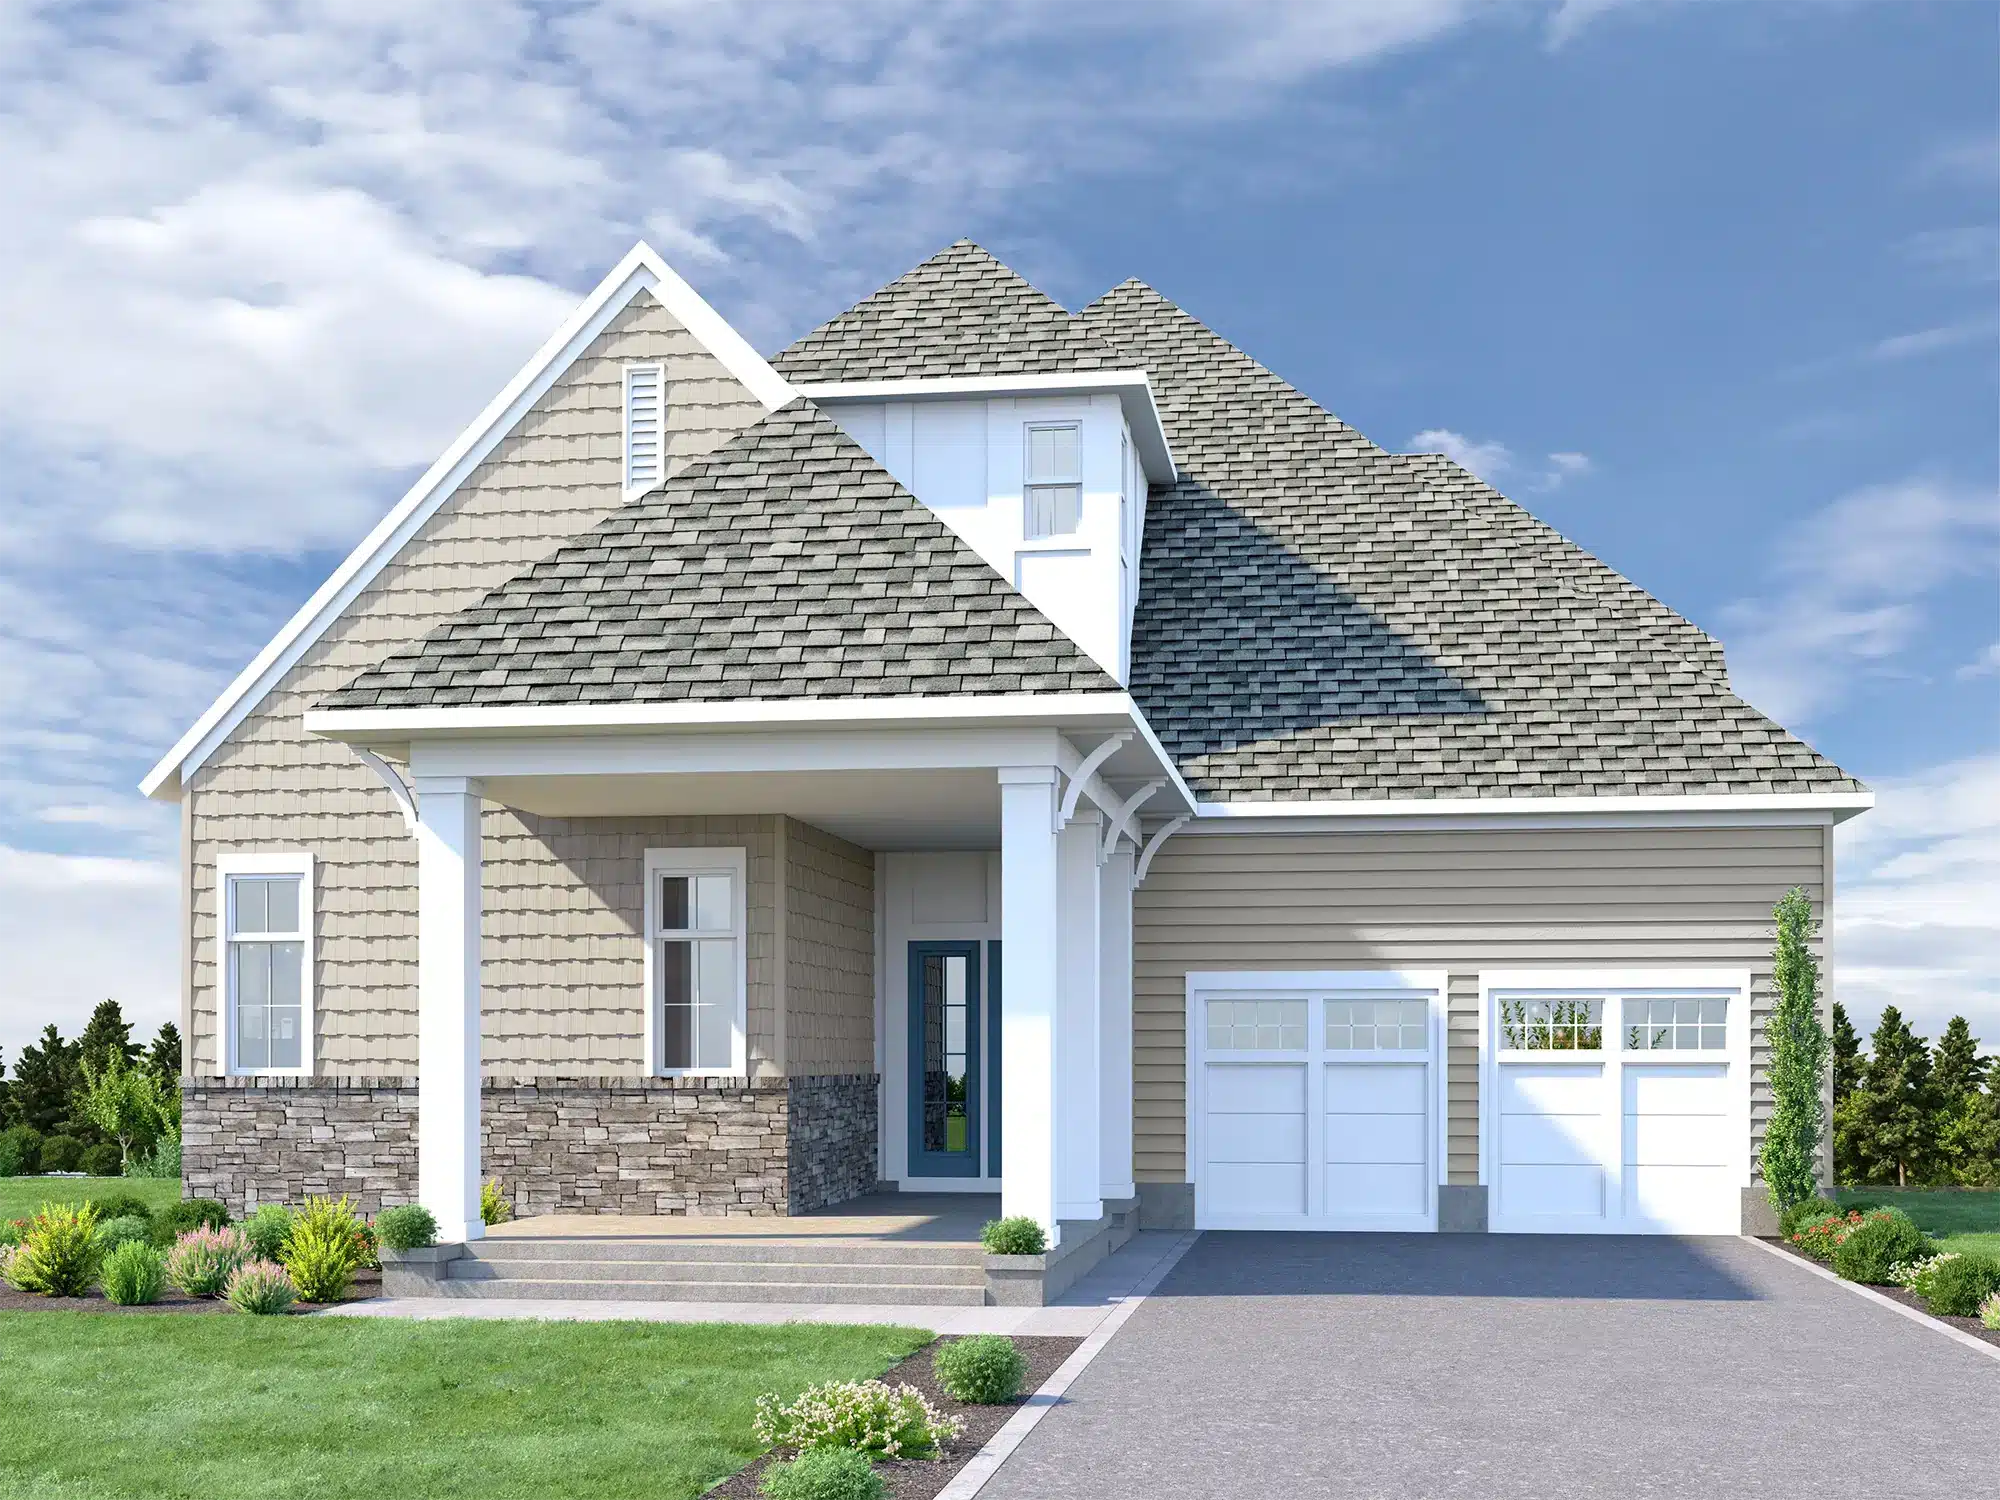 edgewater - House Render front View